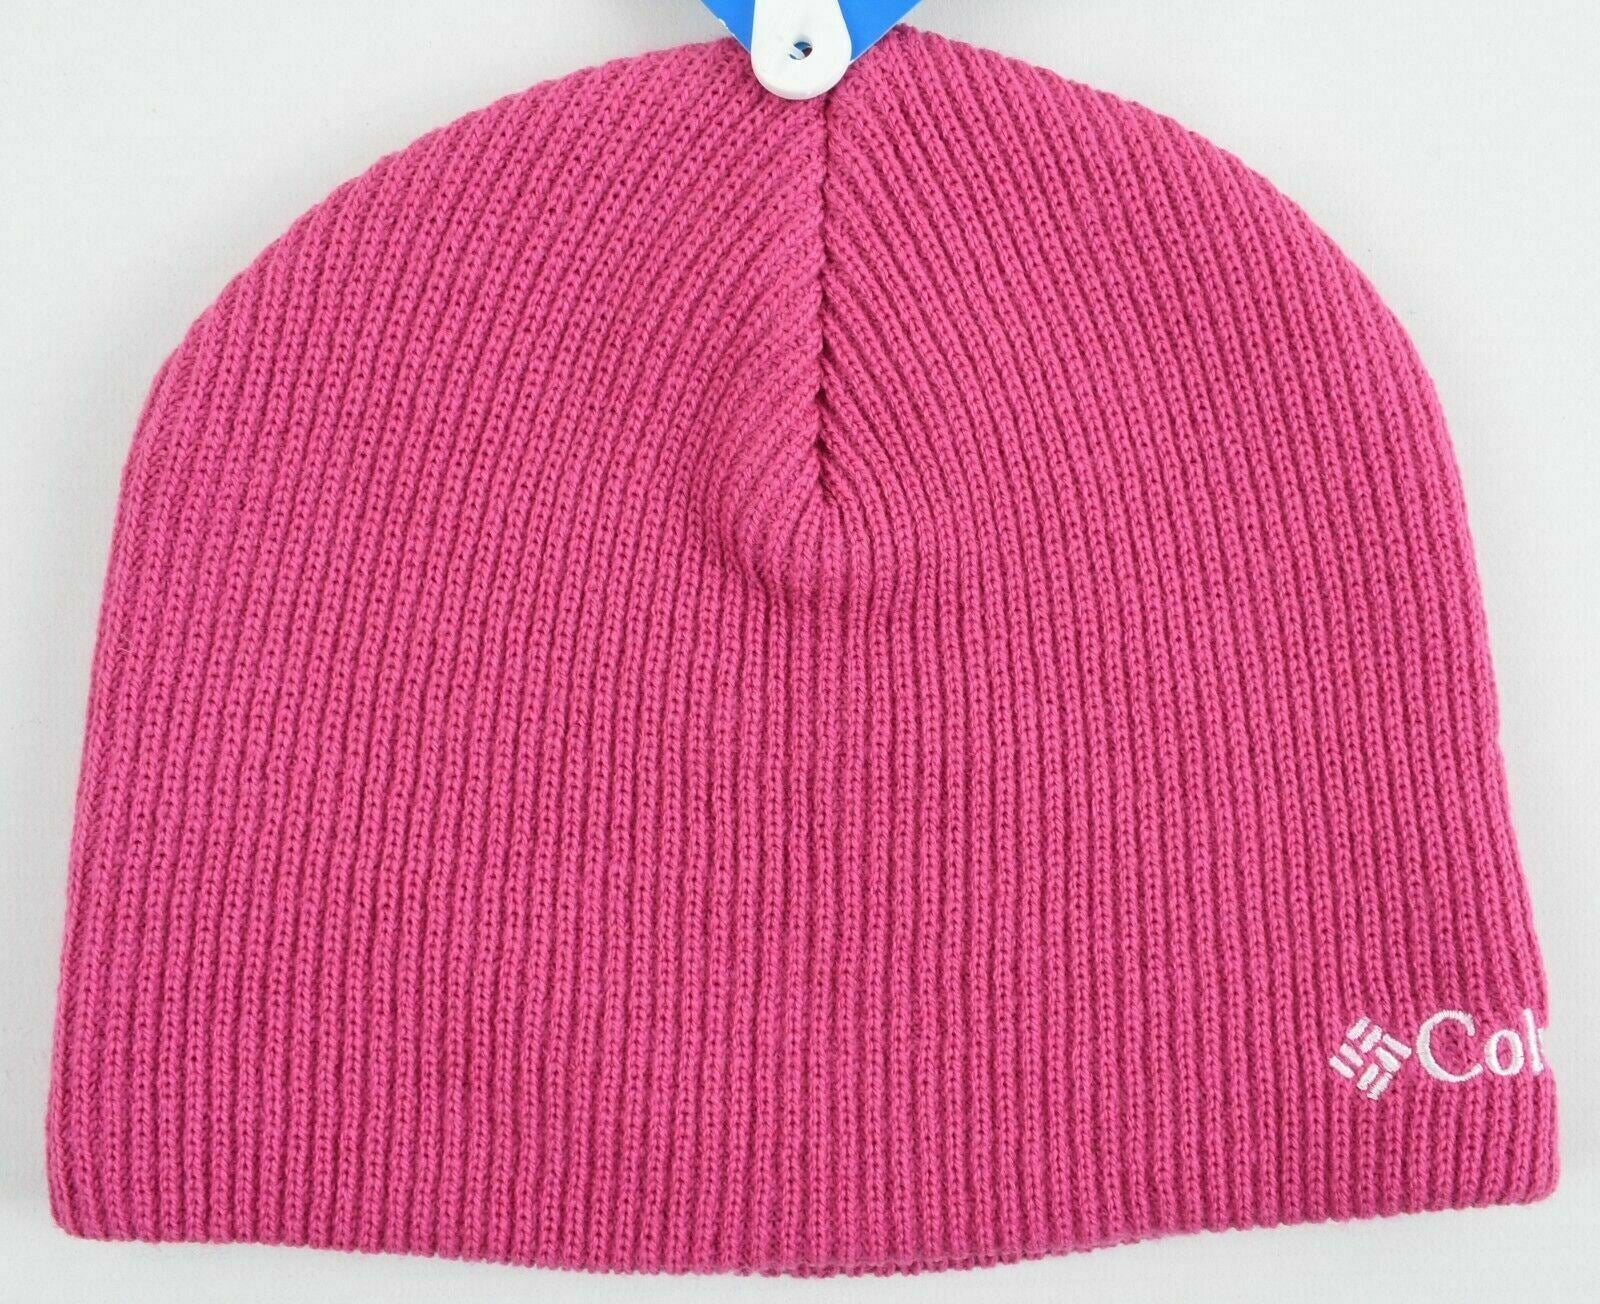 COLUMBIA Girls' Whirlibird Watch Rib Knit Beanie Hat, Pink, One Size Youth